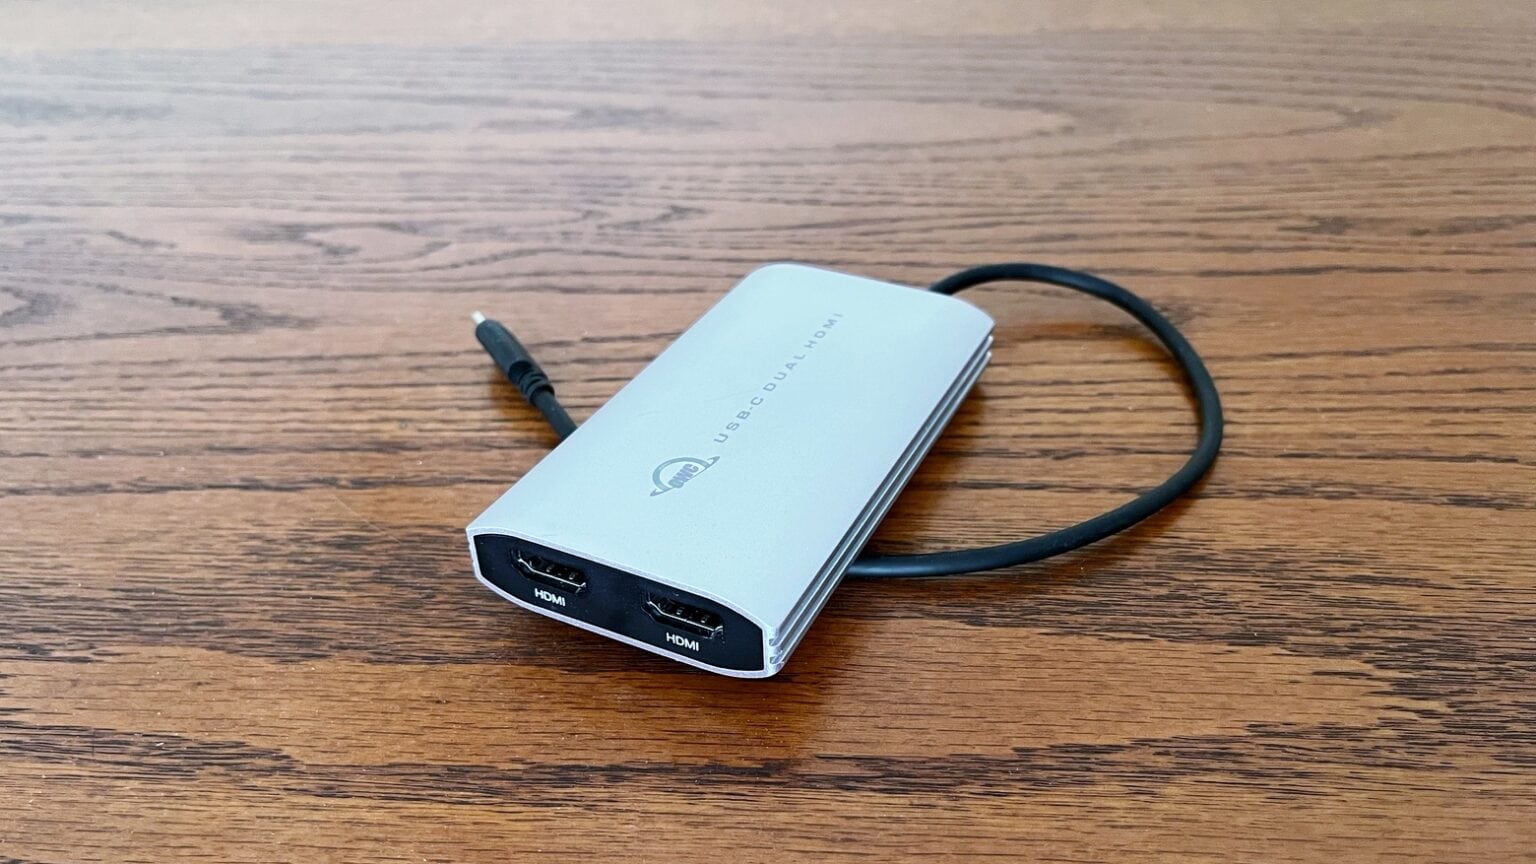 OWC USB-C Dual HDMI 4K Display Adapter with DisplayLink review